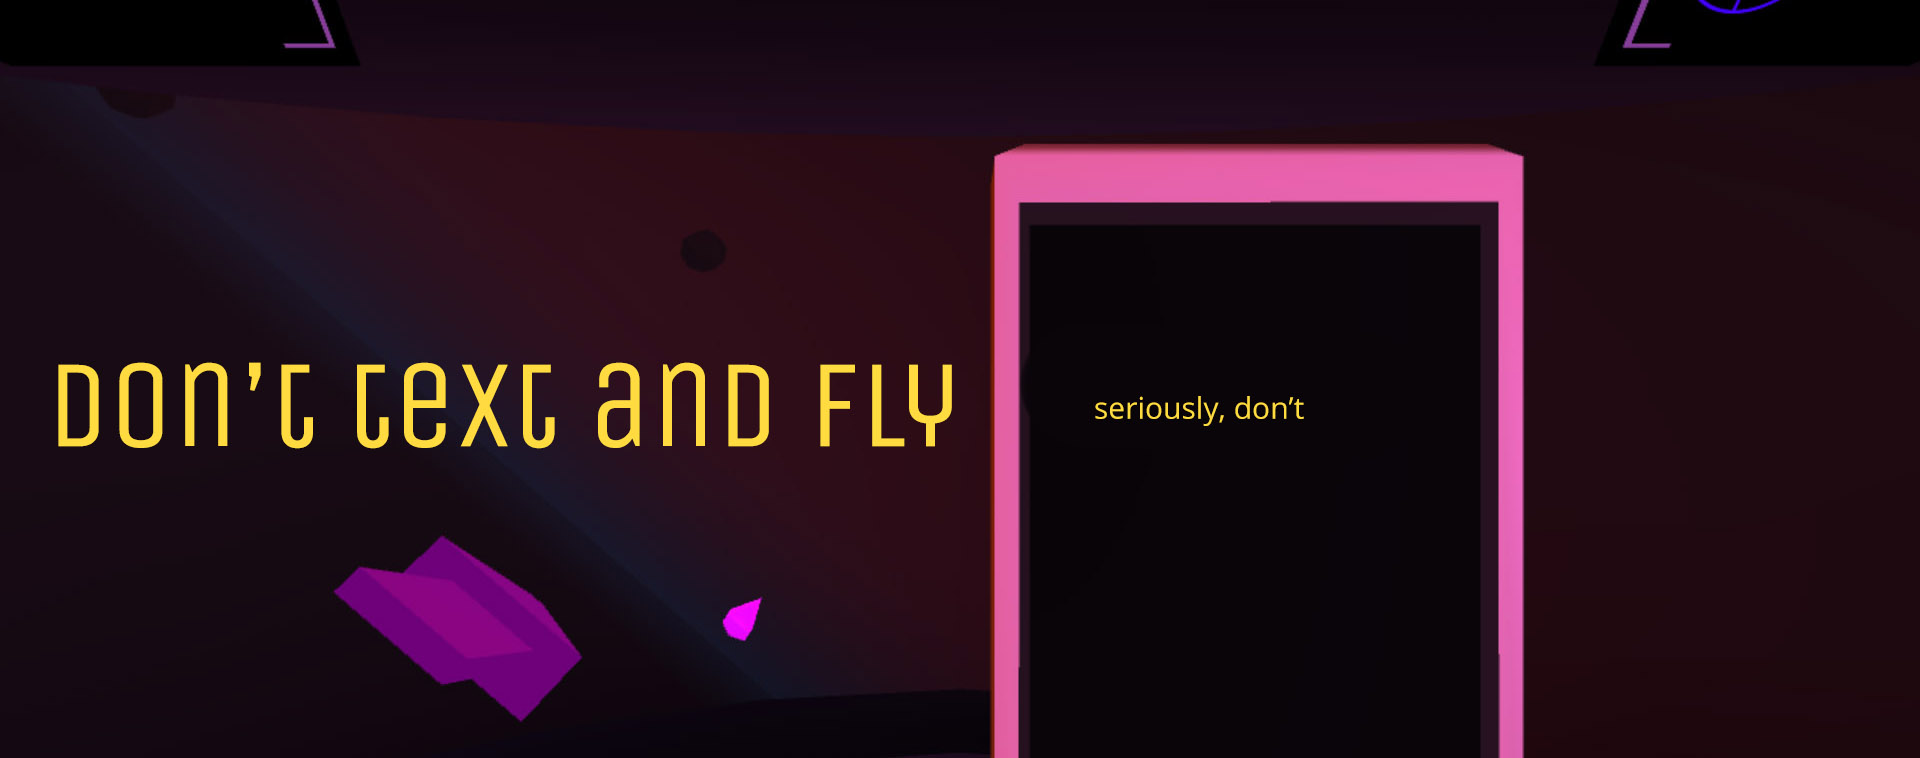 Don't text and fly web